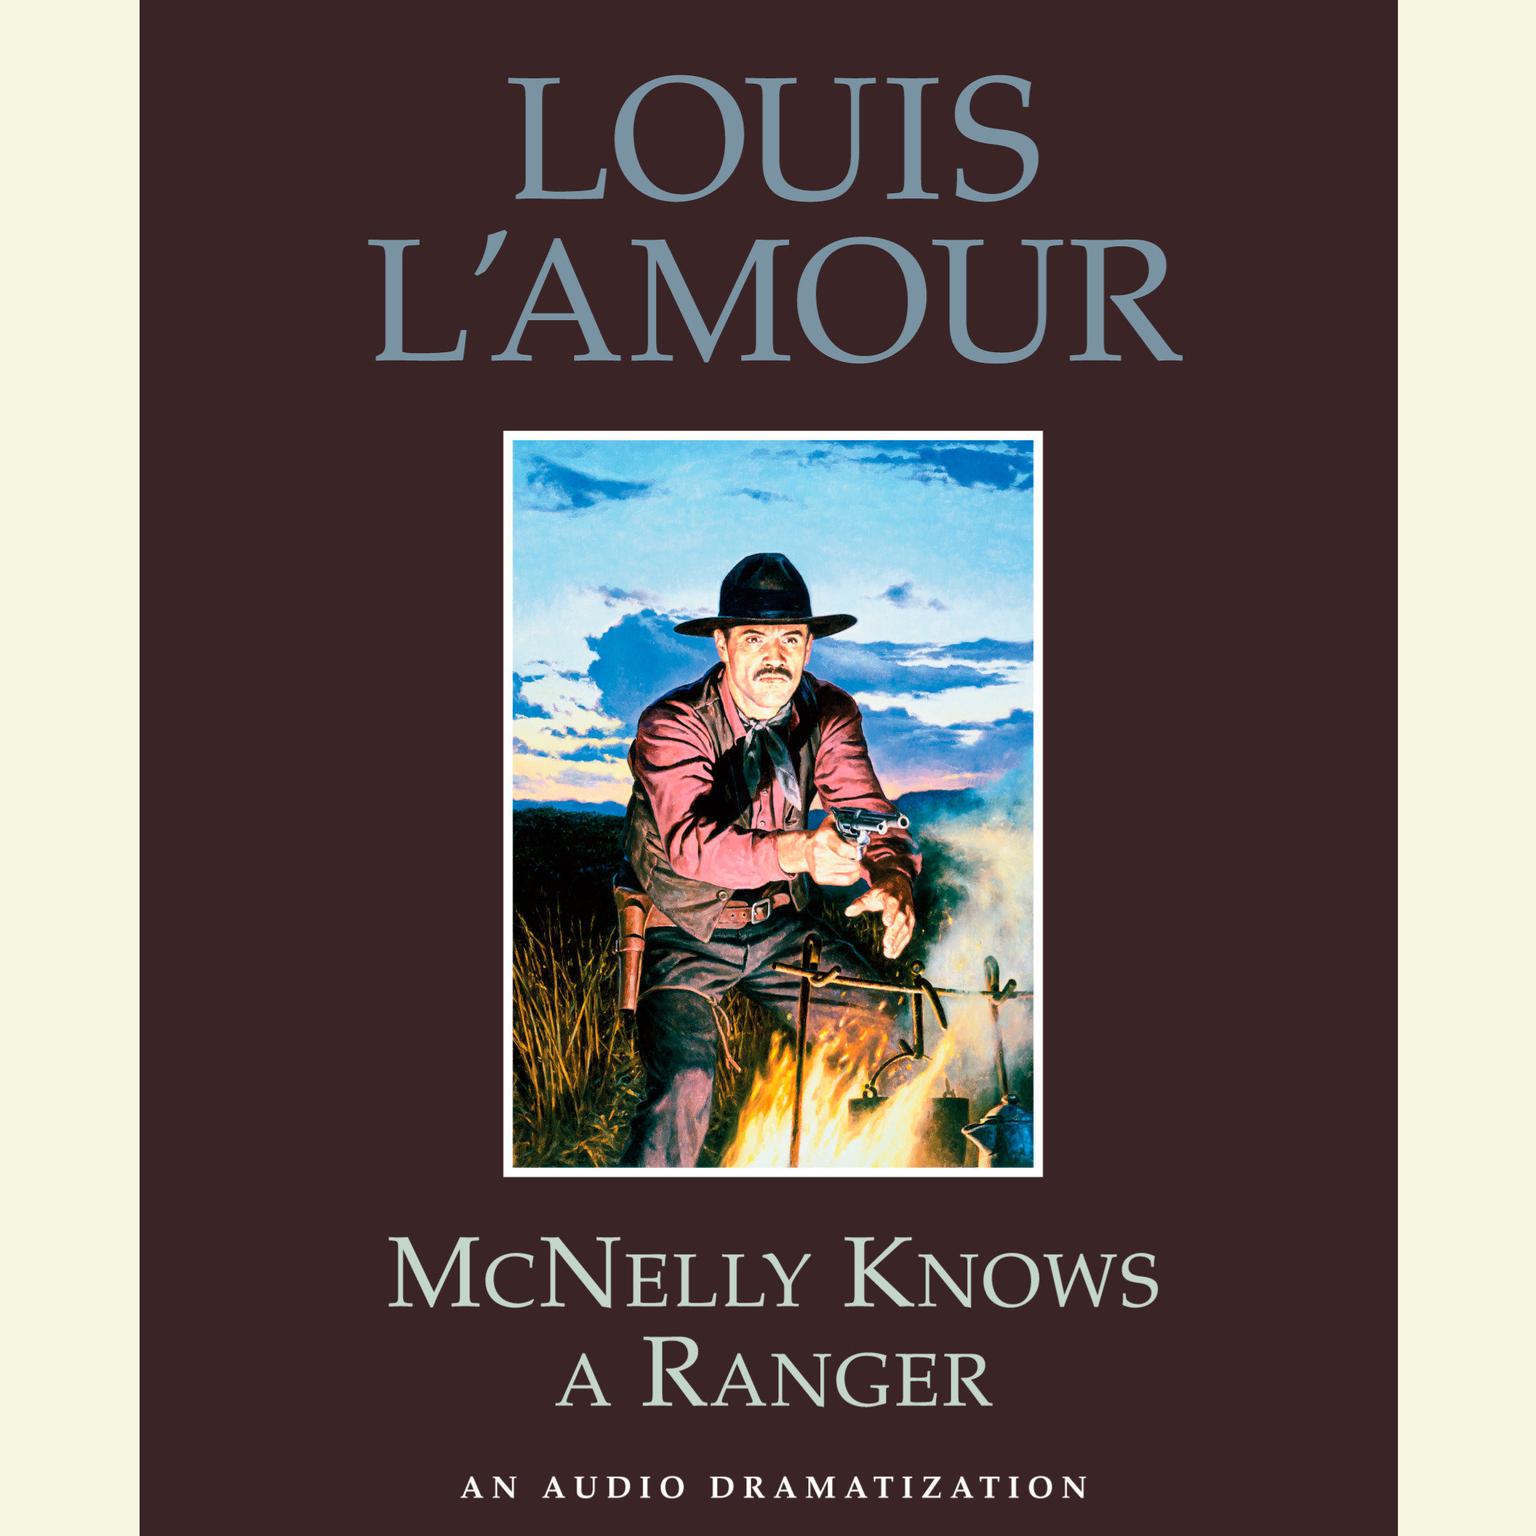 McNelly Knows a Ranger (Abridged) Audiobook, by Louis L’Amour